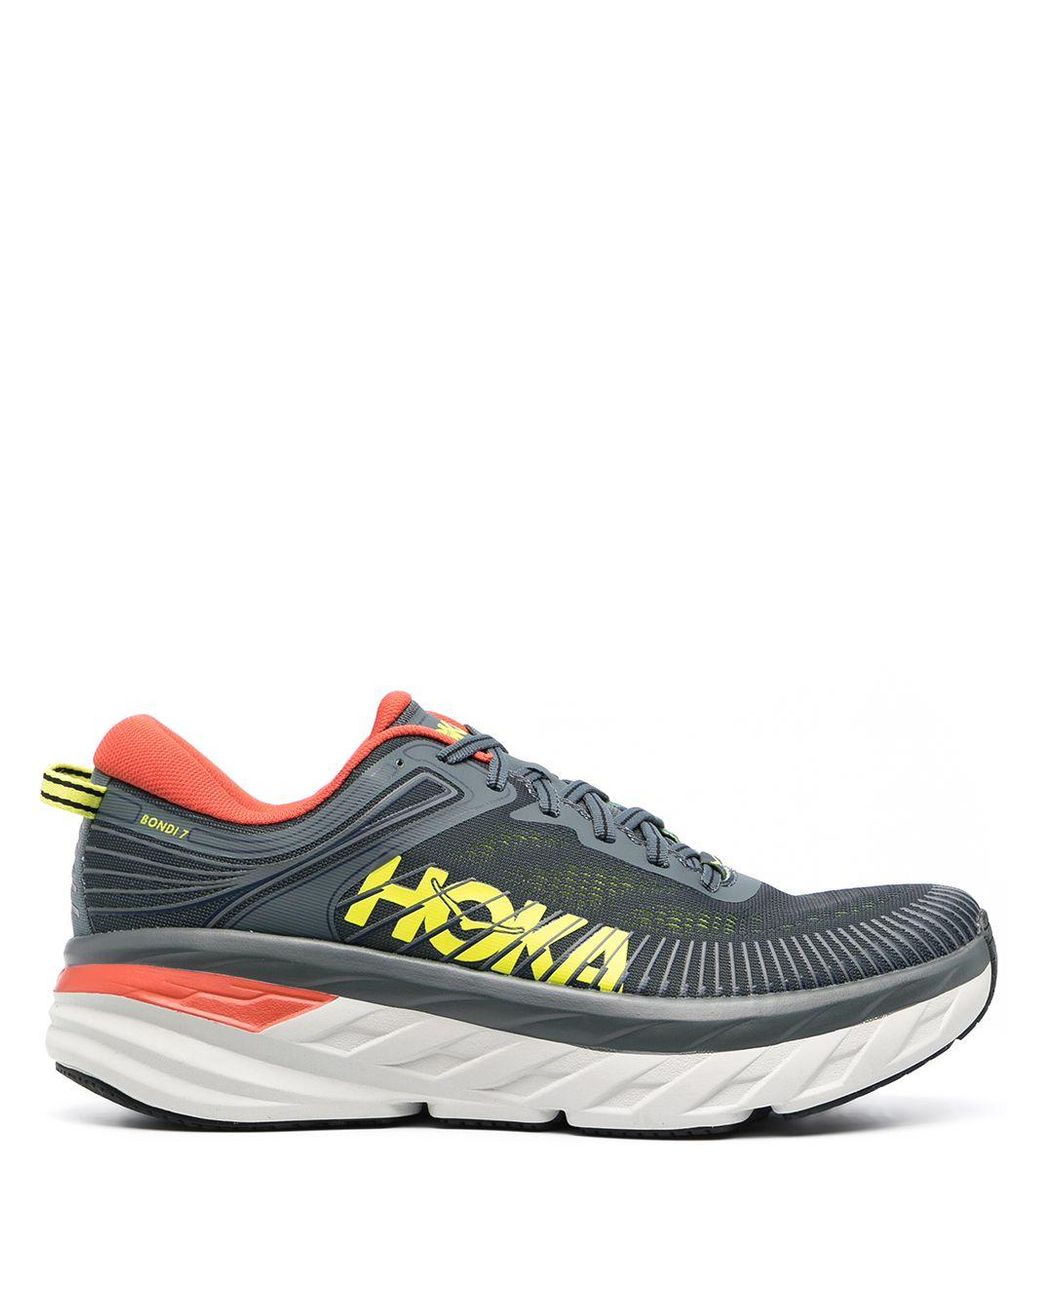 Hoka One One Bondy 7 Chunky Sneakers in Grey (Gray) for Men - Lyst